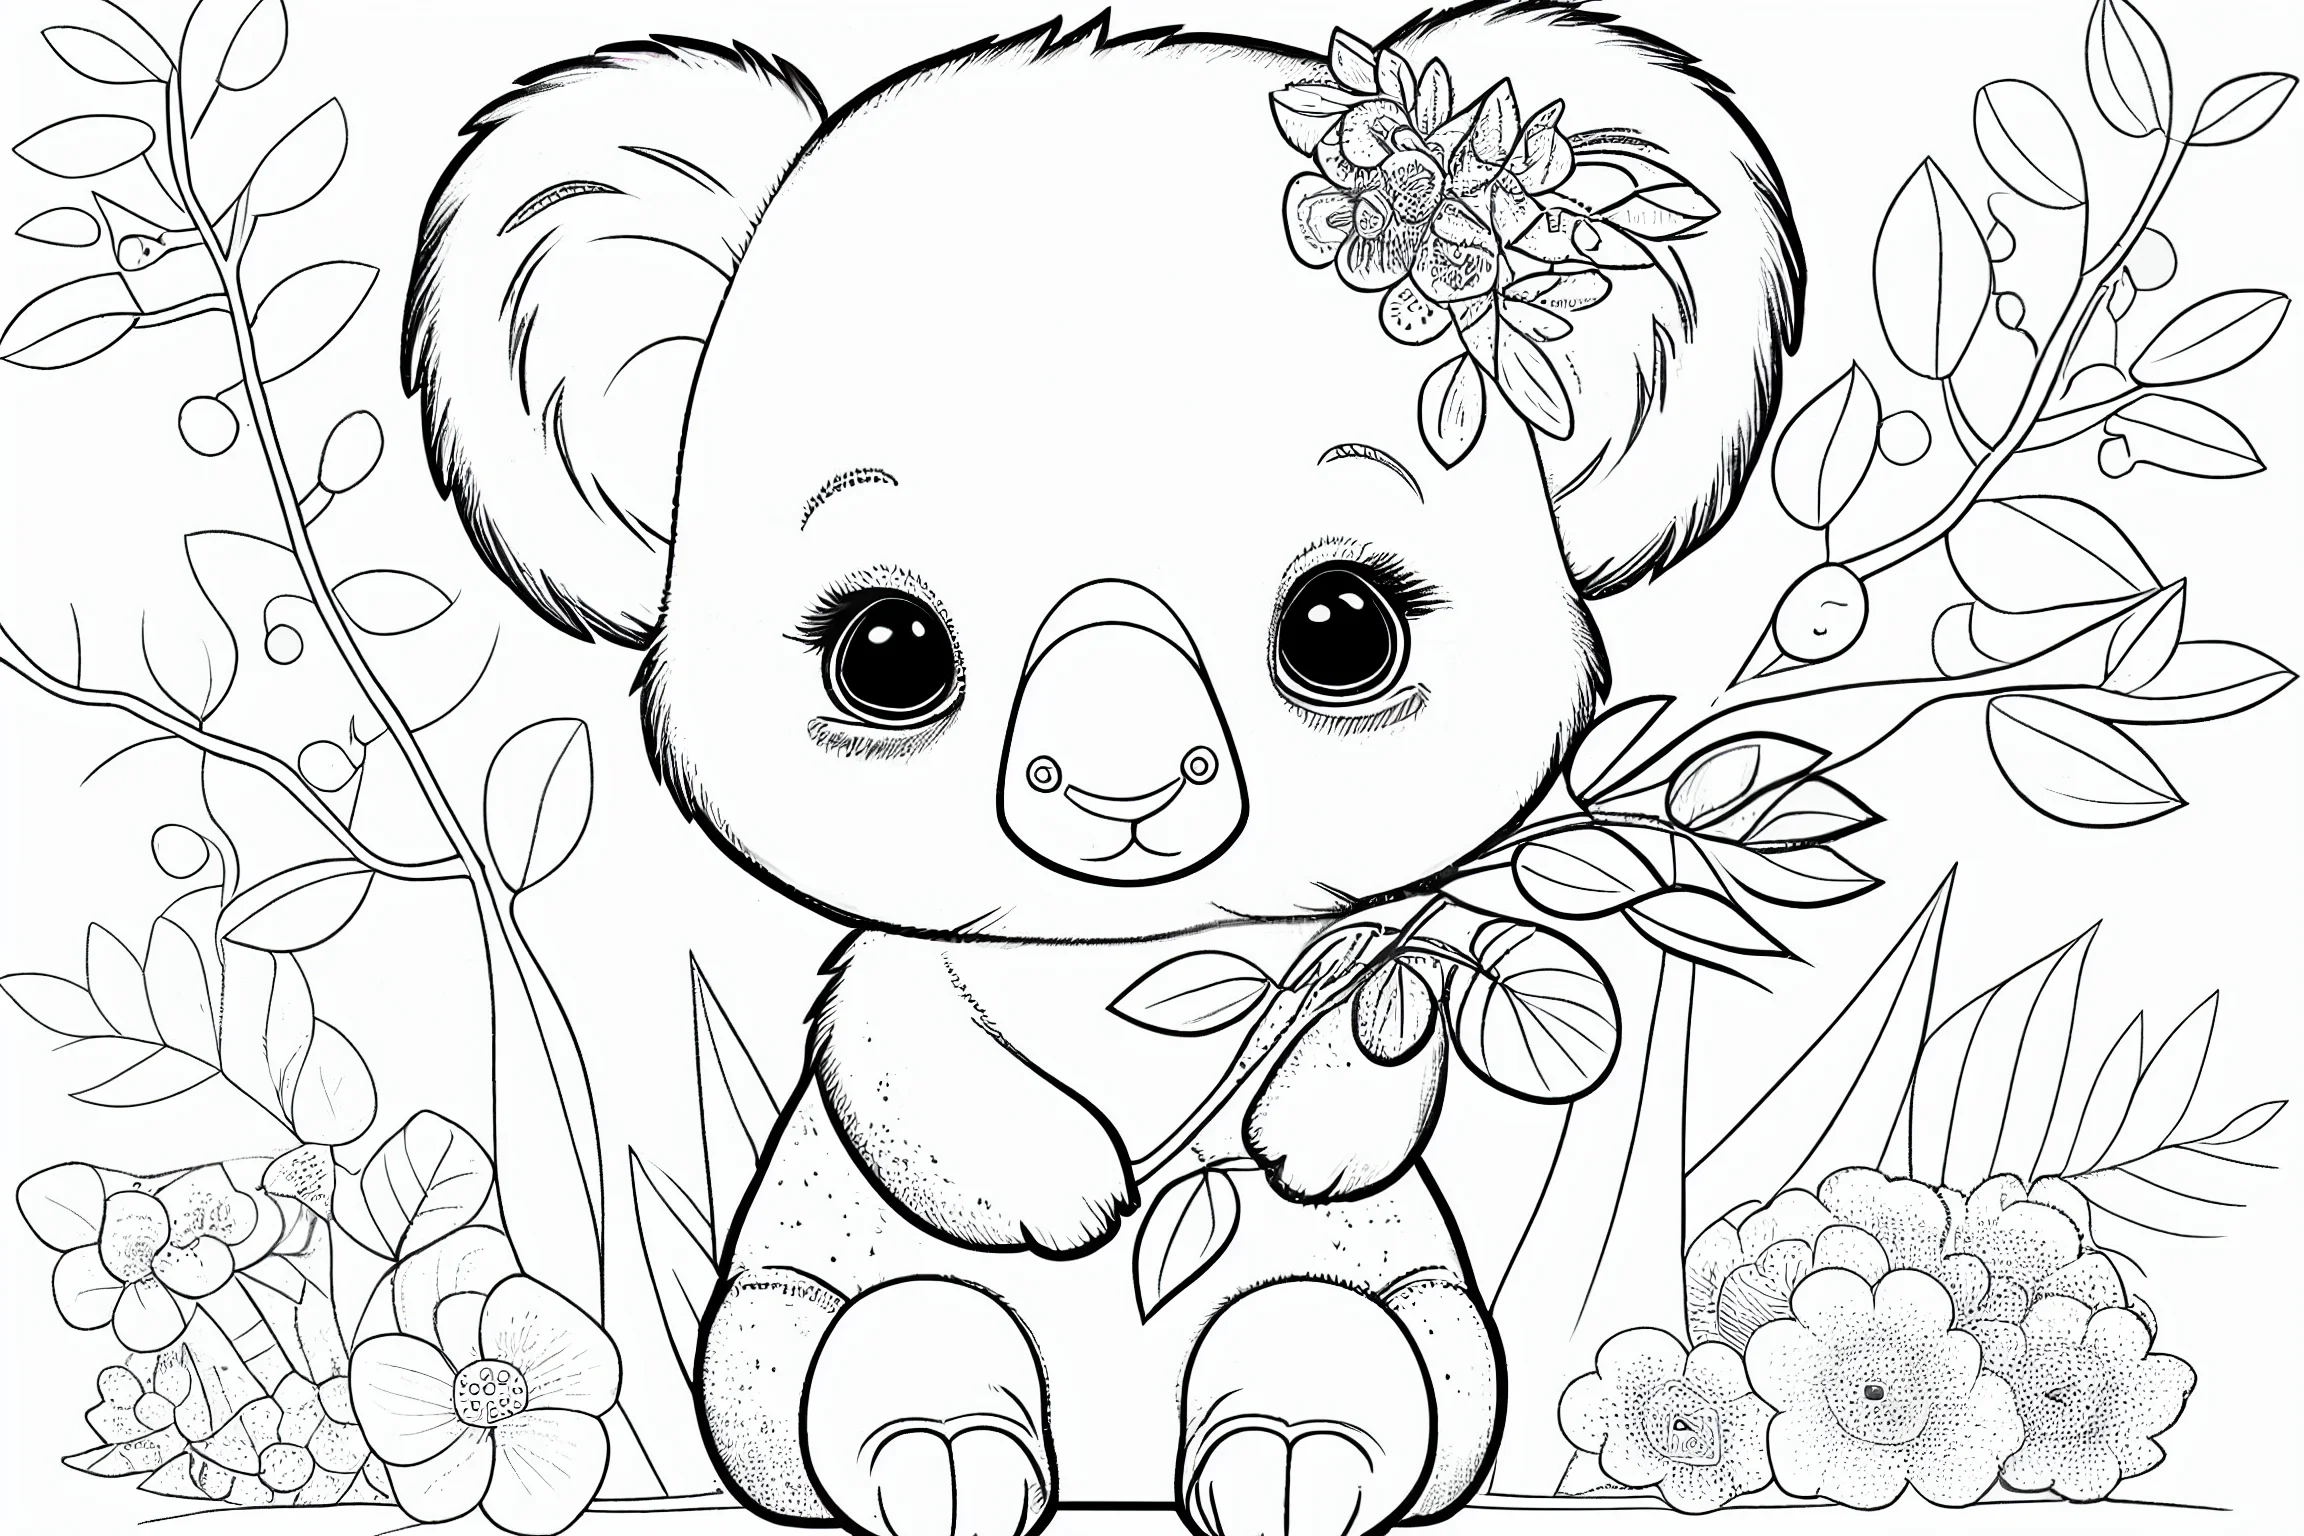 Cute koala coloring pages for kids